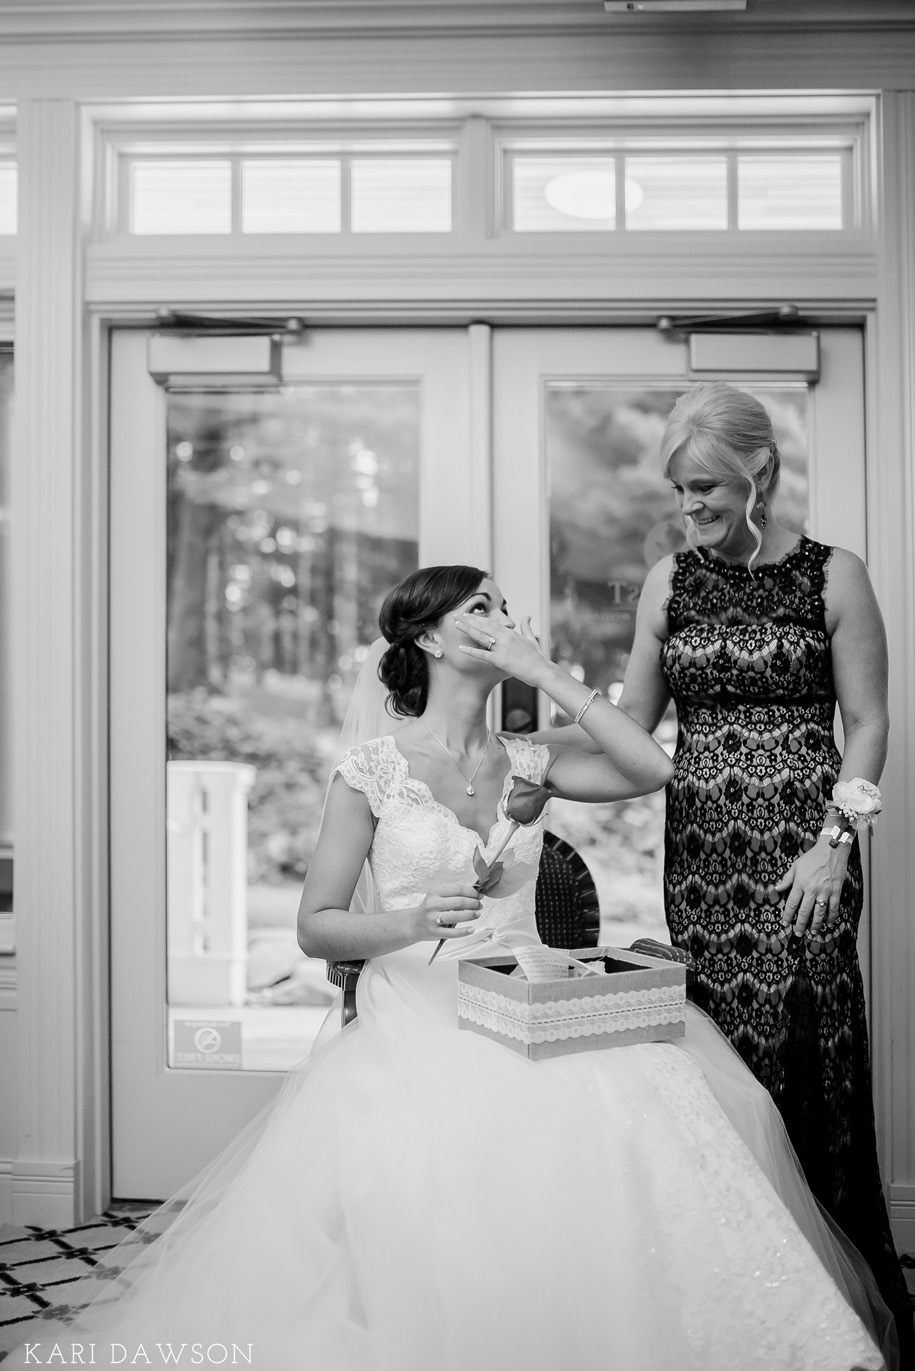 A tender moment as the bride opens her gift from her groom l black tie country club wedding l rustic elegance